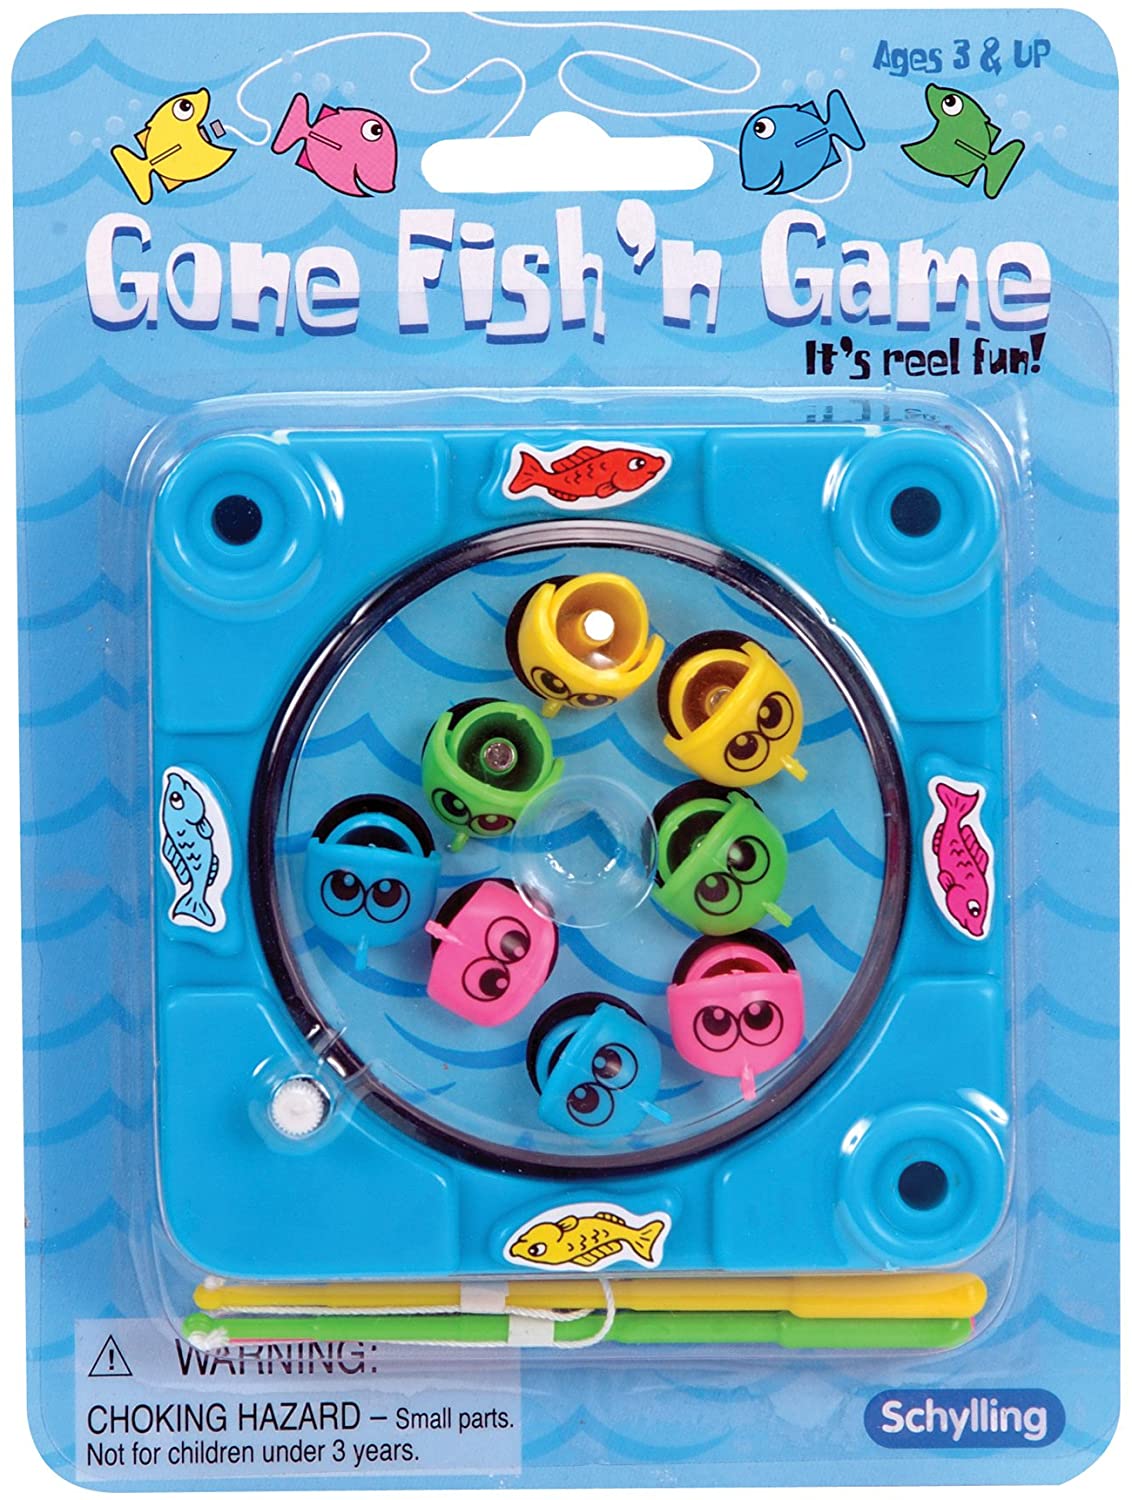 Montessori Go Fishing Game Bath Toy For Toddler Kids Magnetic